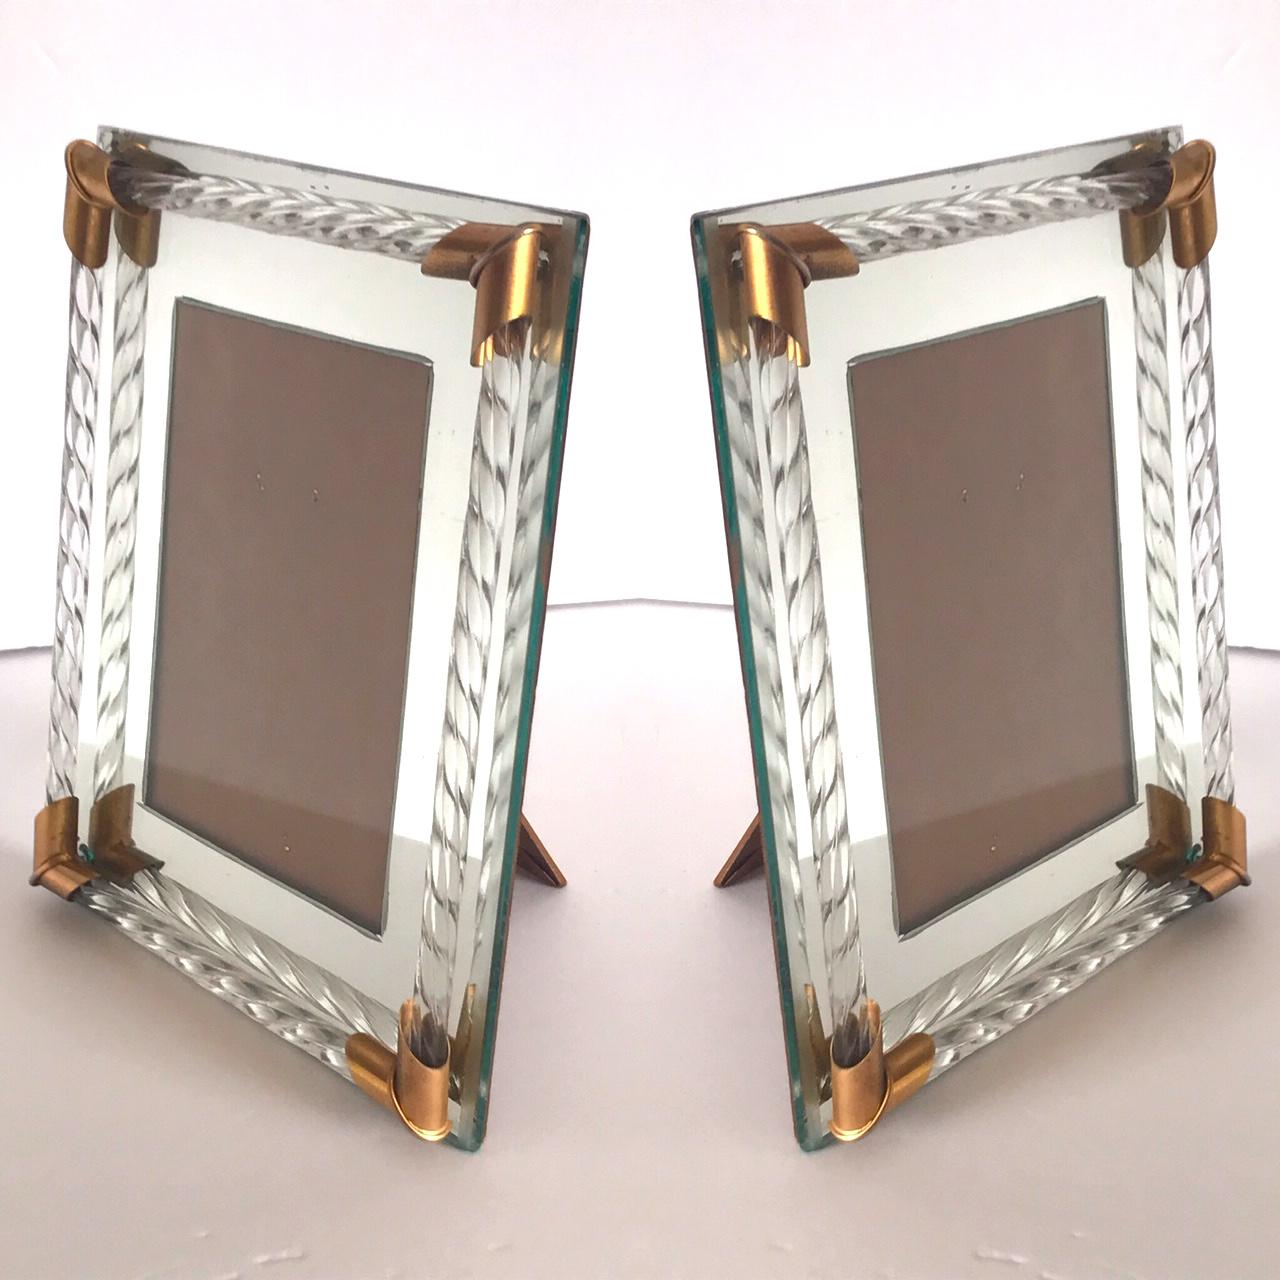 Pair of gorgeous Italian Hollywood Regency mirrored picture frames with Murano glass rods in the form of twisted rope. The picture frames hold 4